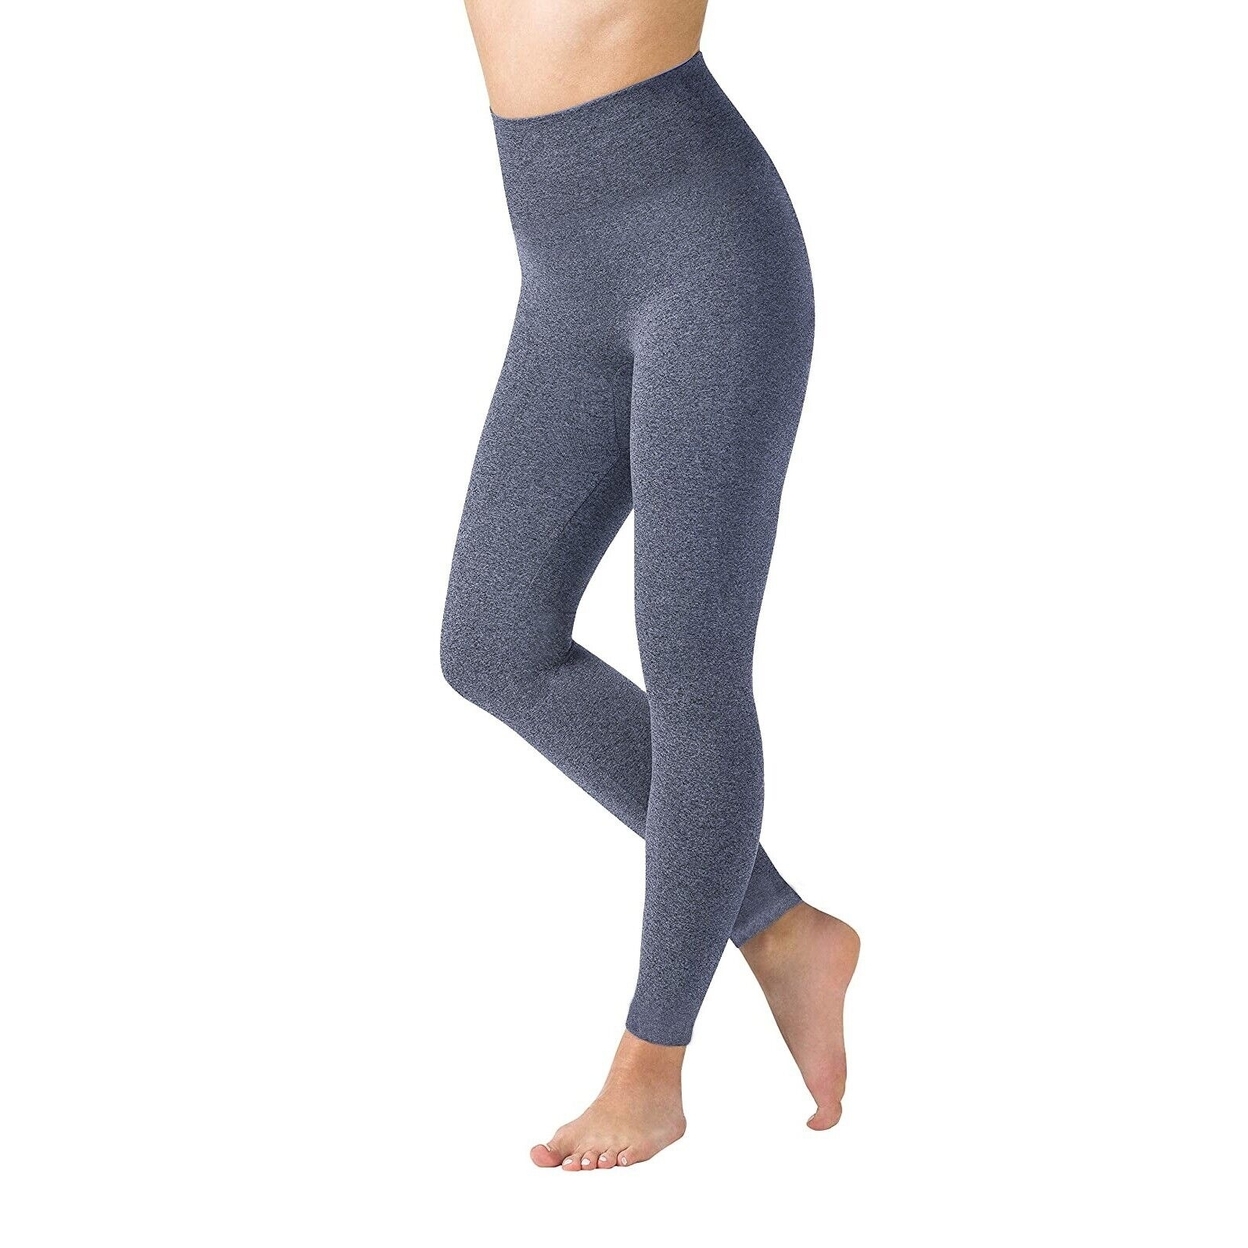 Multi-Packs Women High Waisted Fleece Lined Marled Leggings Ultra Soft Warm Pant - Charcoal/navy, 1, X-large